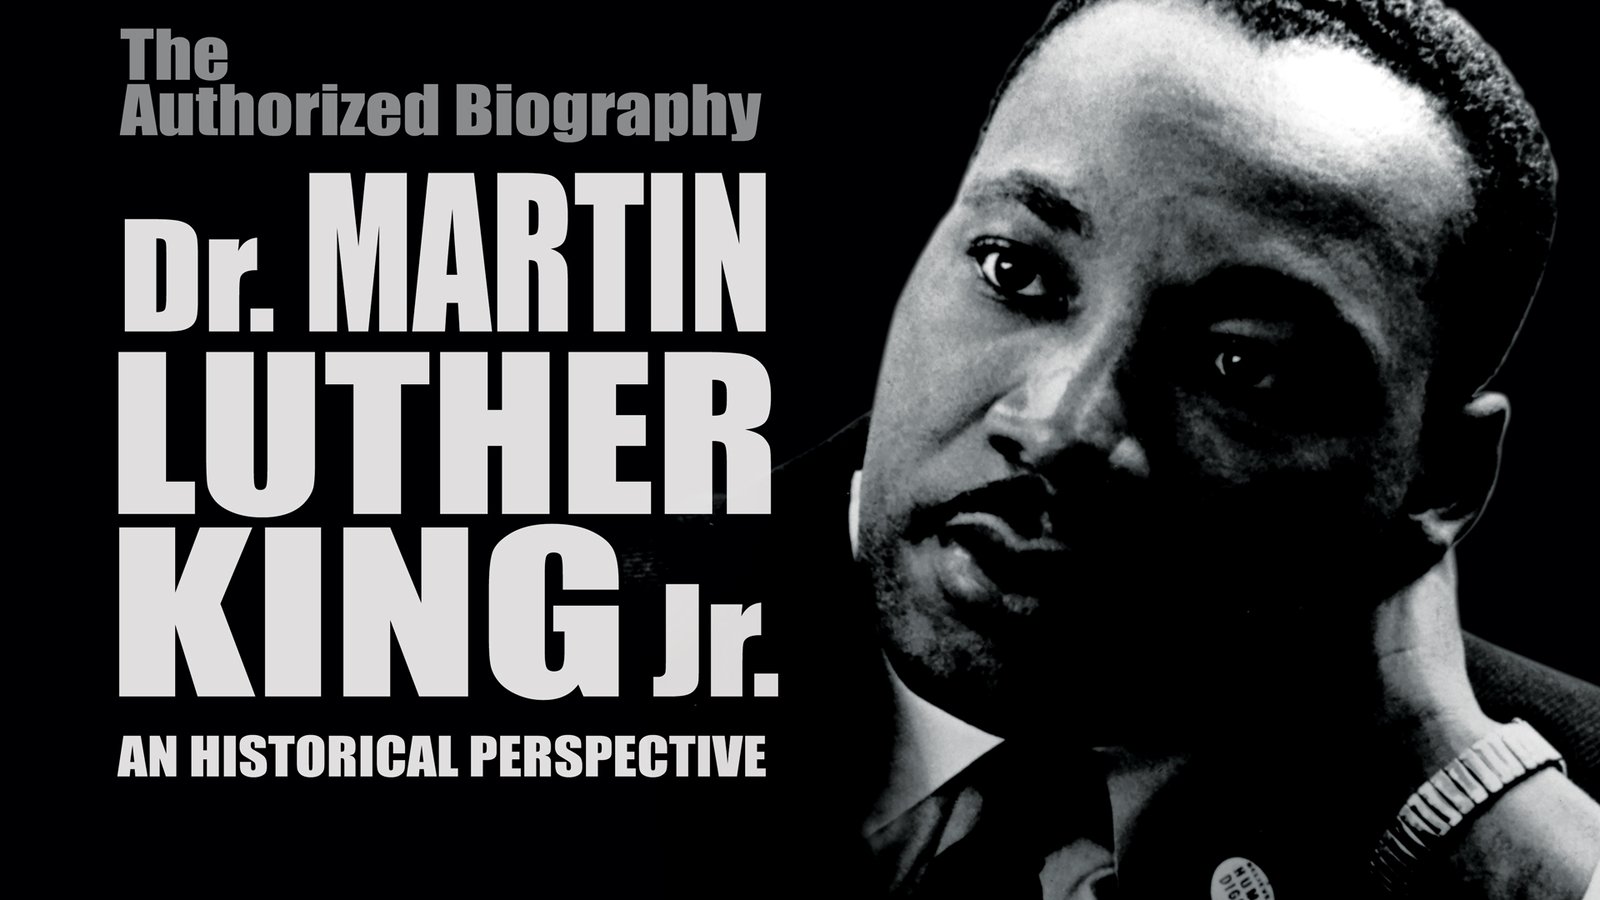 Dr. Martin Luther King, Jr: A Historical Perspective - An Authorized Biography of a Civil Rights Hero